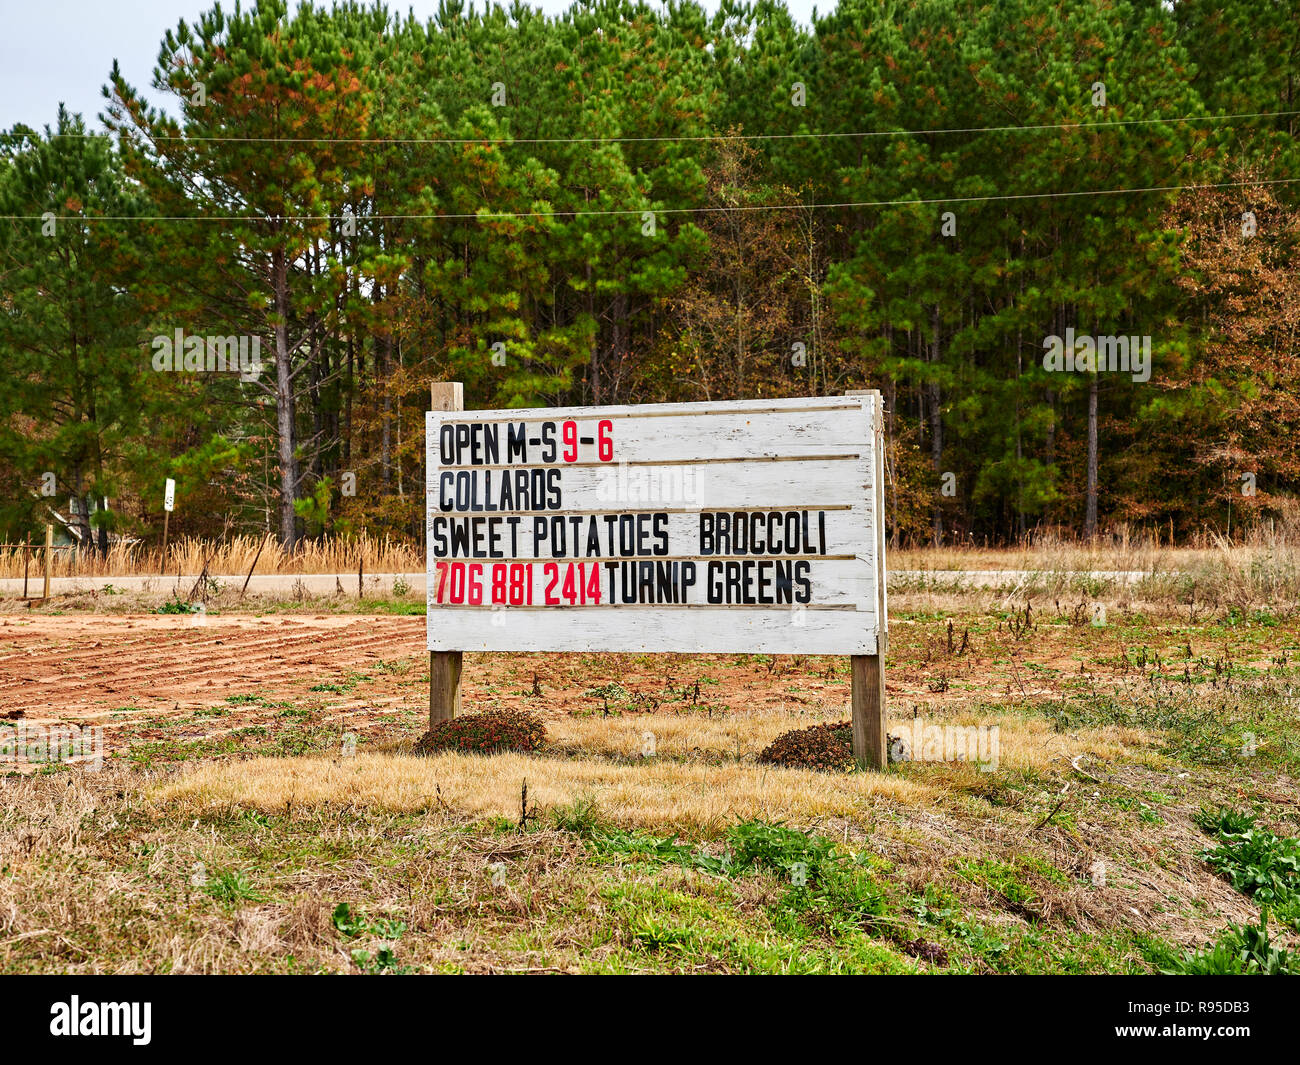 Roadside sign advertising fresh picked vegetables common to the southern USA or American south including collards, turnip greens, in rural Georgia USA Stock Photo